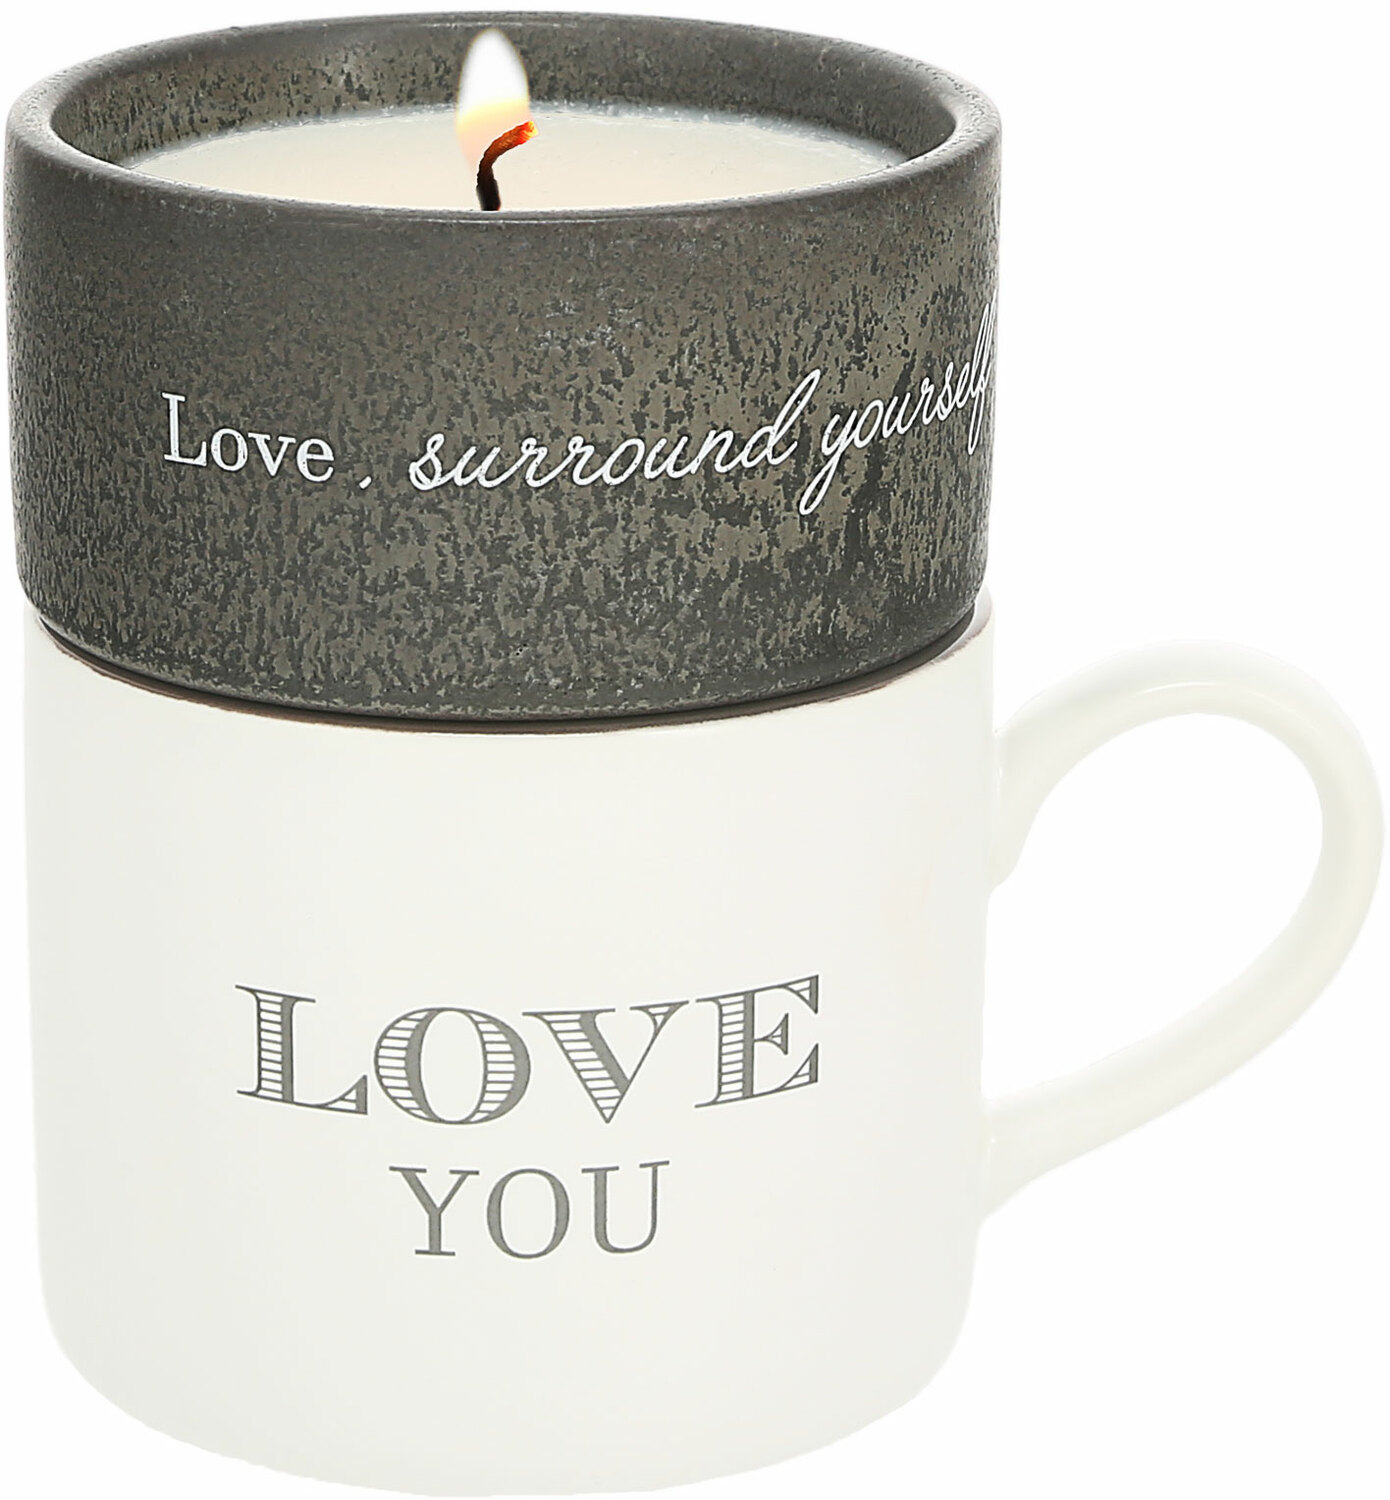 Love by Filled with Warmth - Love - Stacking Mug and Candle Set
100% Soy Wax Scent: Tranquility